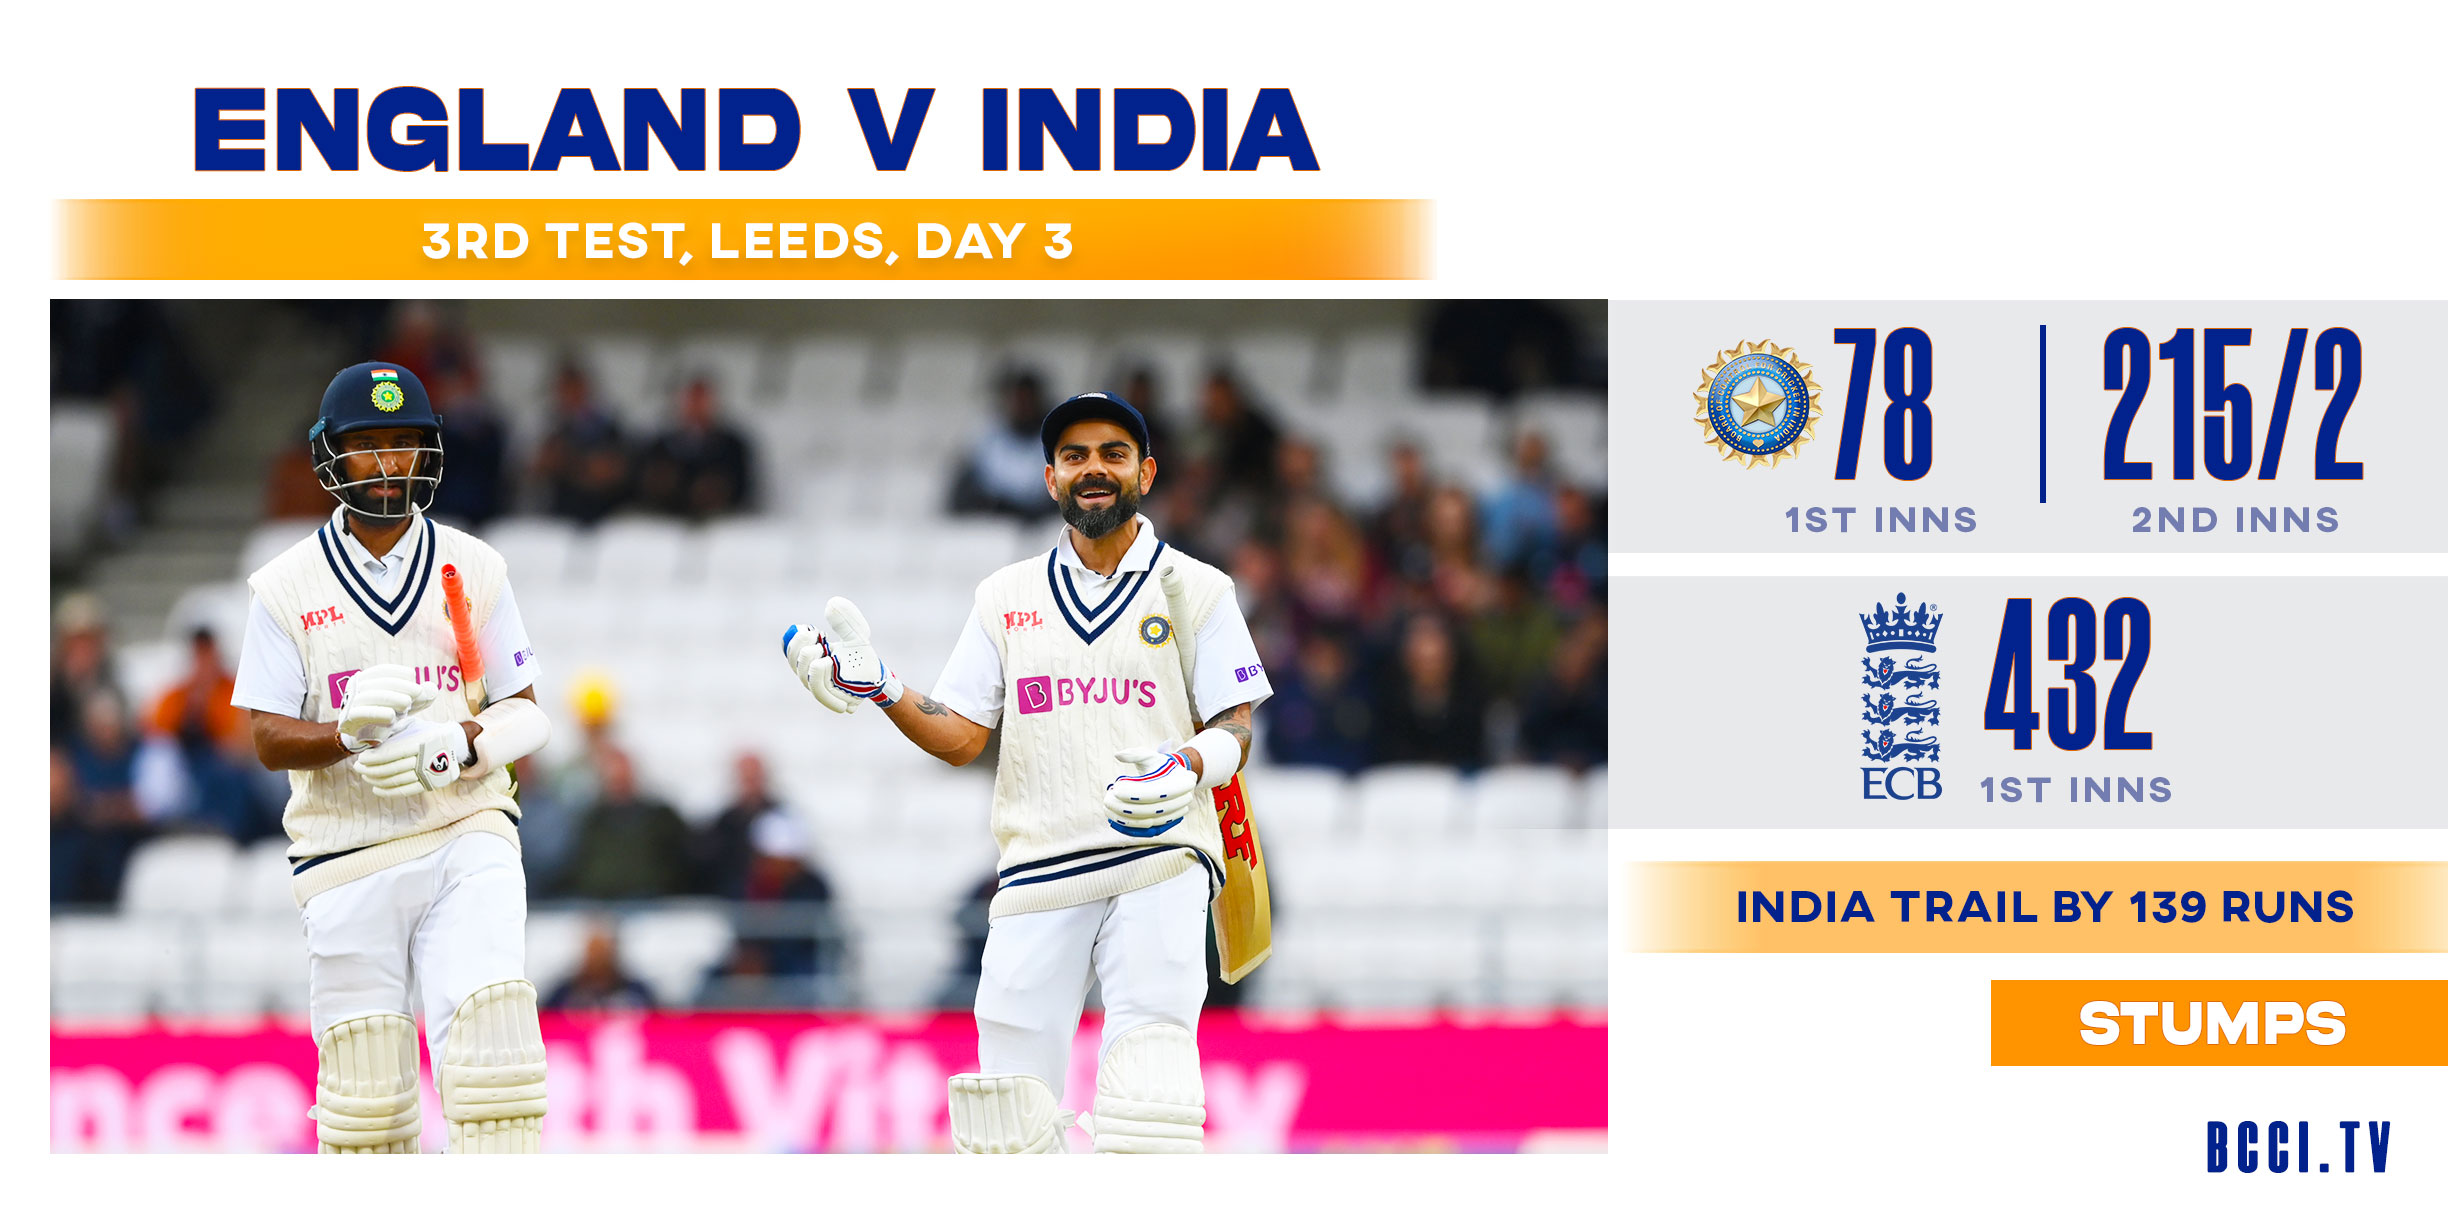 Ind vs Eng 3rd test, day 3: Twiiter - BCCI.